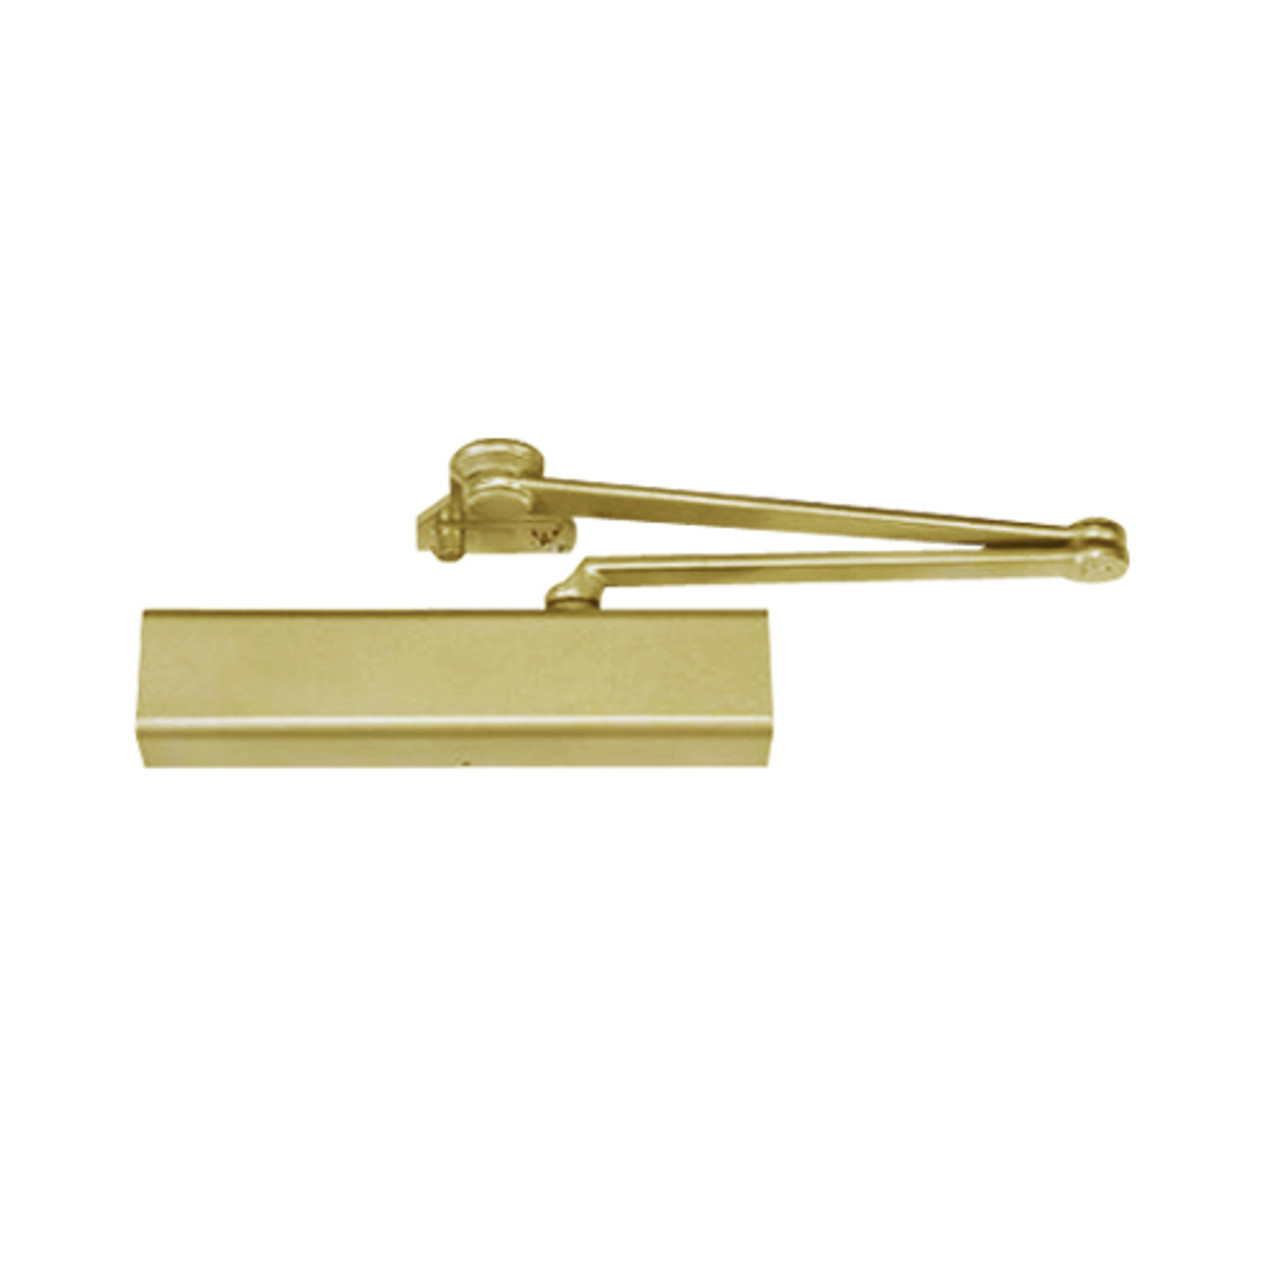 CLP8501DA-696 Norton 8000 Series Full Cover Non-Hold Open Door Closers with CloserPlus Arm in Gold Finish